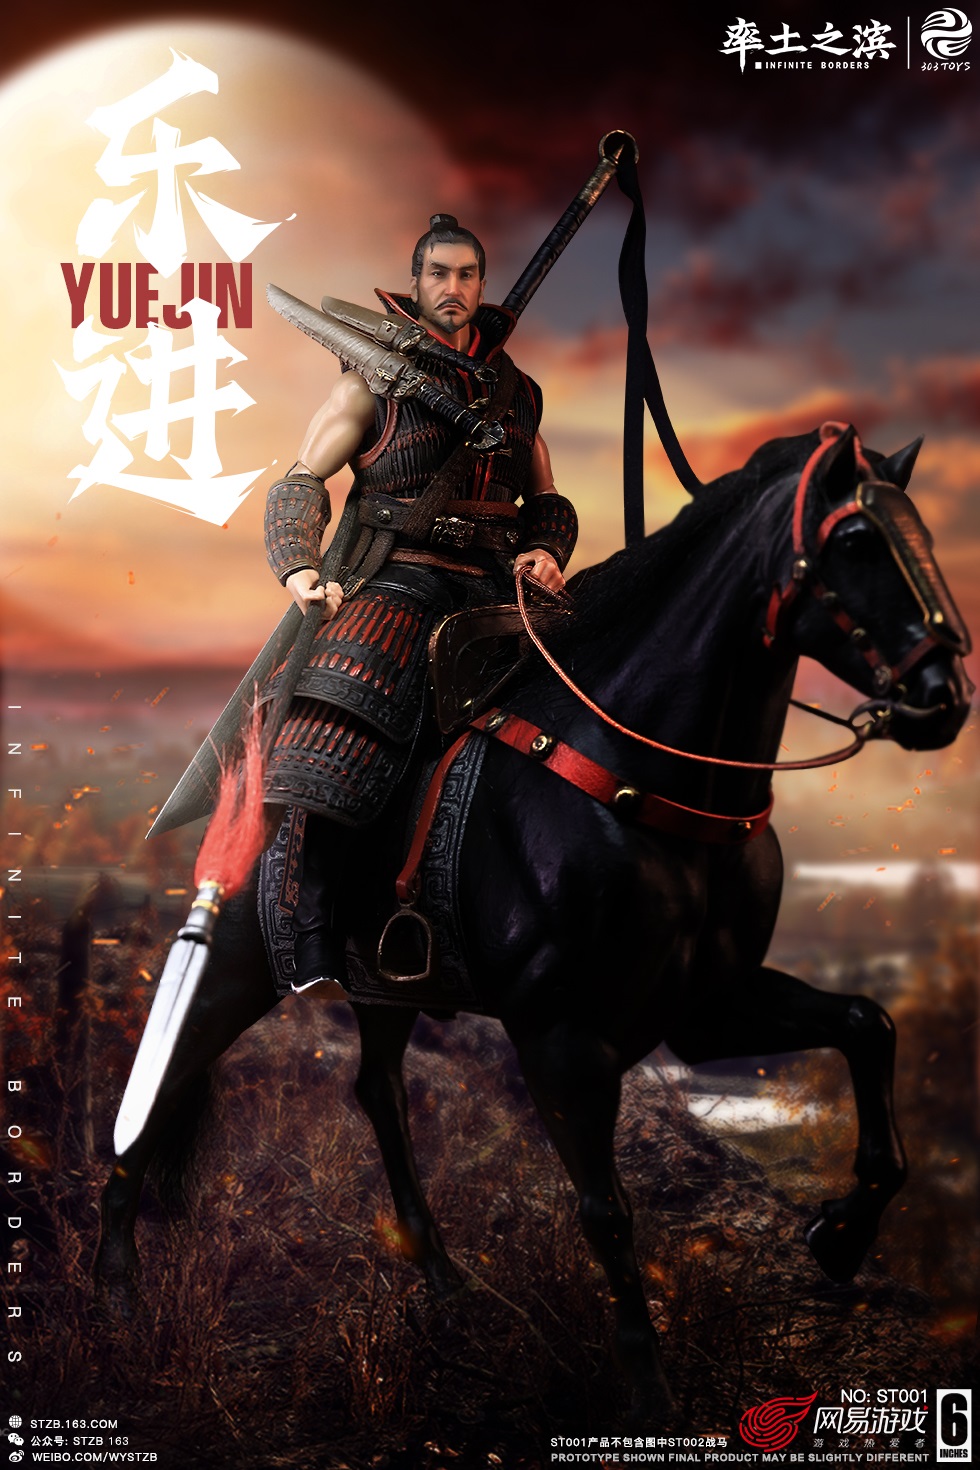 NEW PRODUCT: INFINITE BORDERS X 303TOYS 1/12 - The Five Sons of Elite Generals: Yue Jin ST001 02169